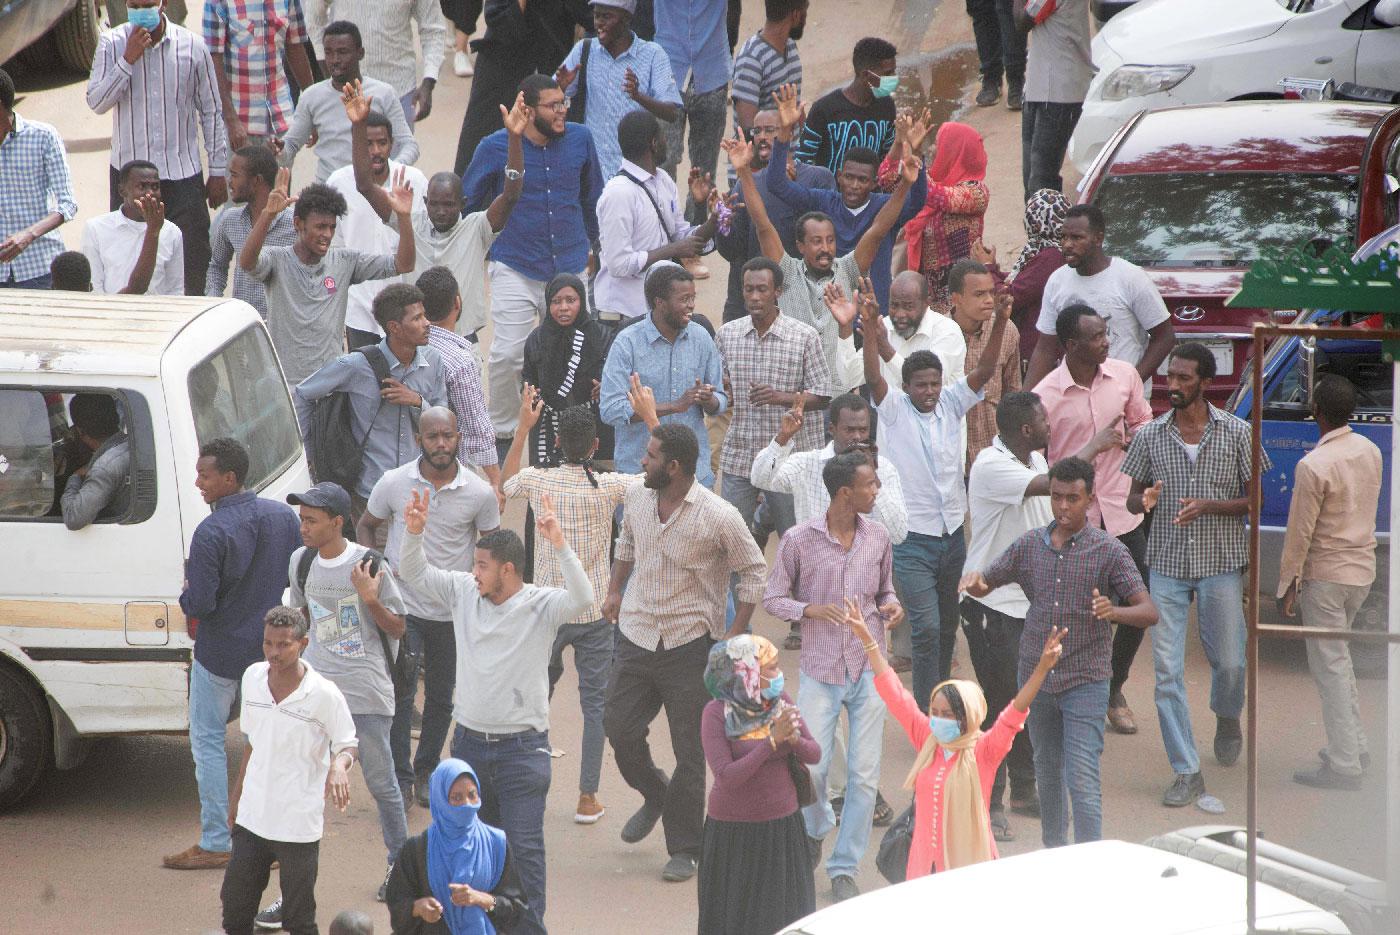 Sudanese demonstrators march during an anti-government protest in Khartoum, Sudan February 7, 2019.